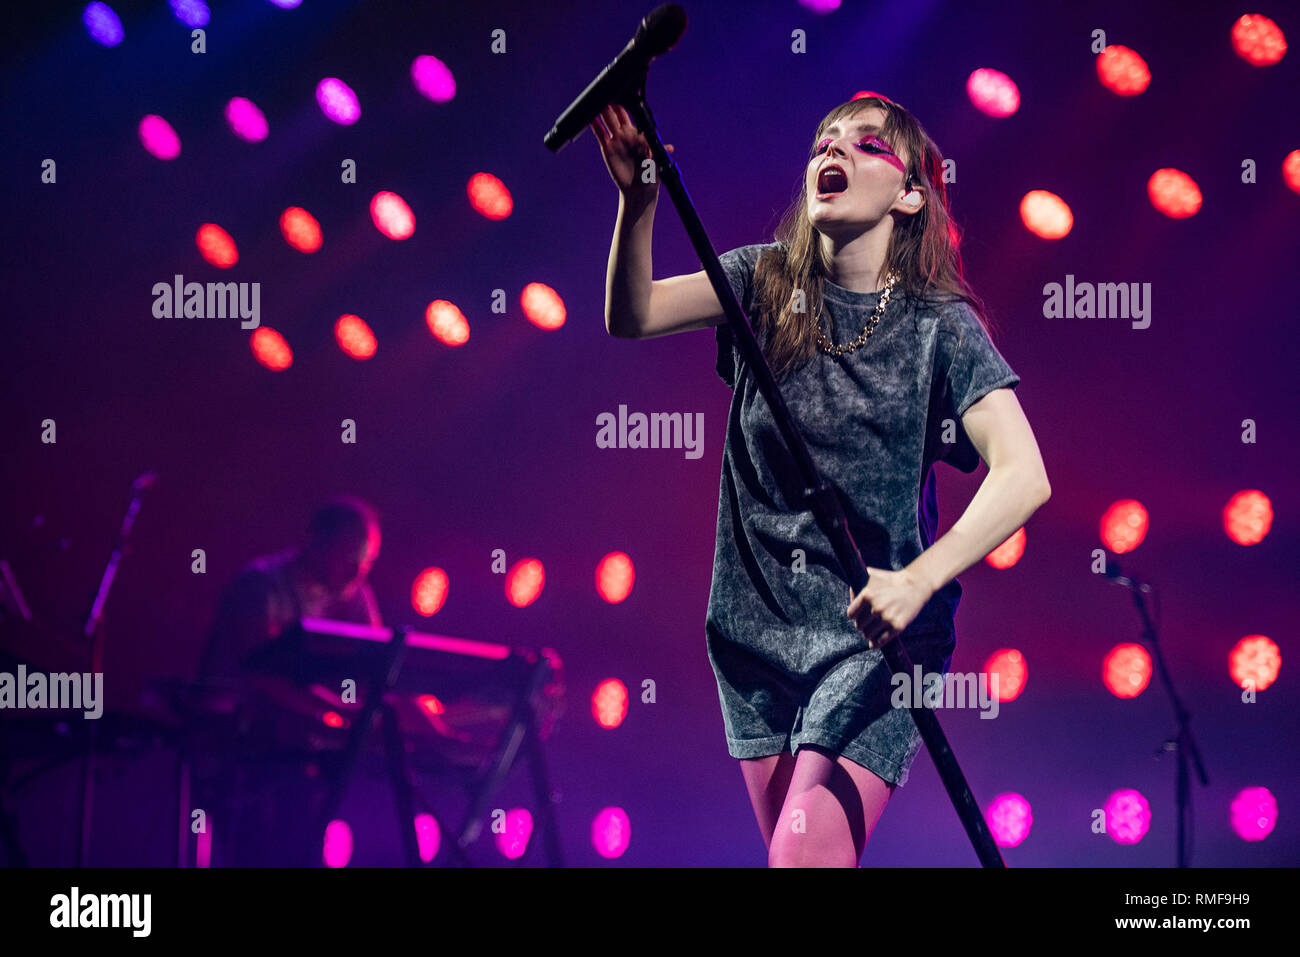 Manchester, UK. 14th Feb, 2019. Lauren Mayberry, Iain Cook and Martin Doherty of synth pop band Chvrches perform at the Victoria Warehouse, Manchester 2019-02-14 Credit: Gary Mather/Alamy Live News Stock Photo